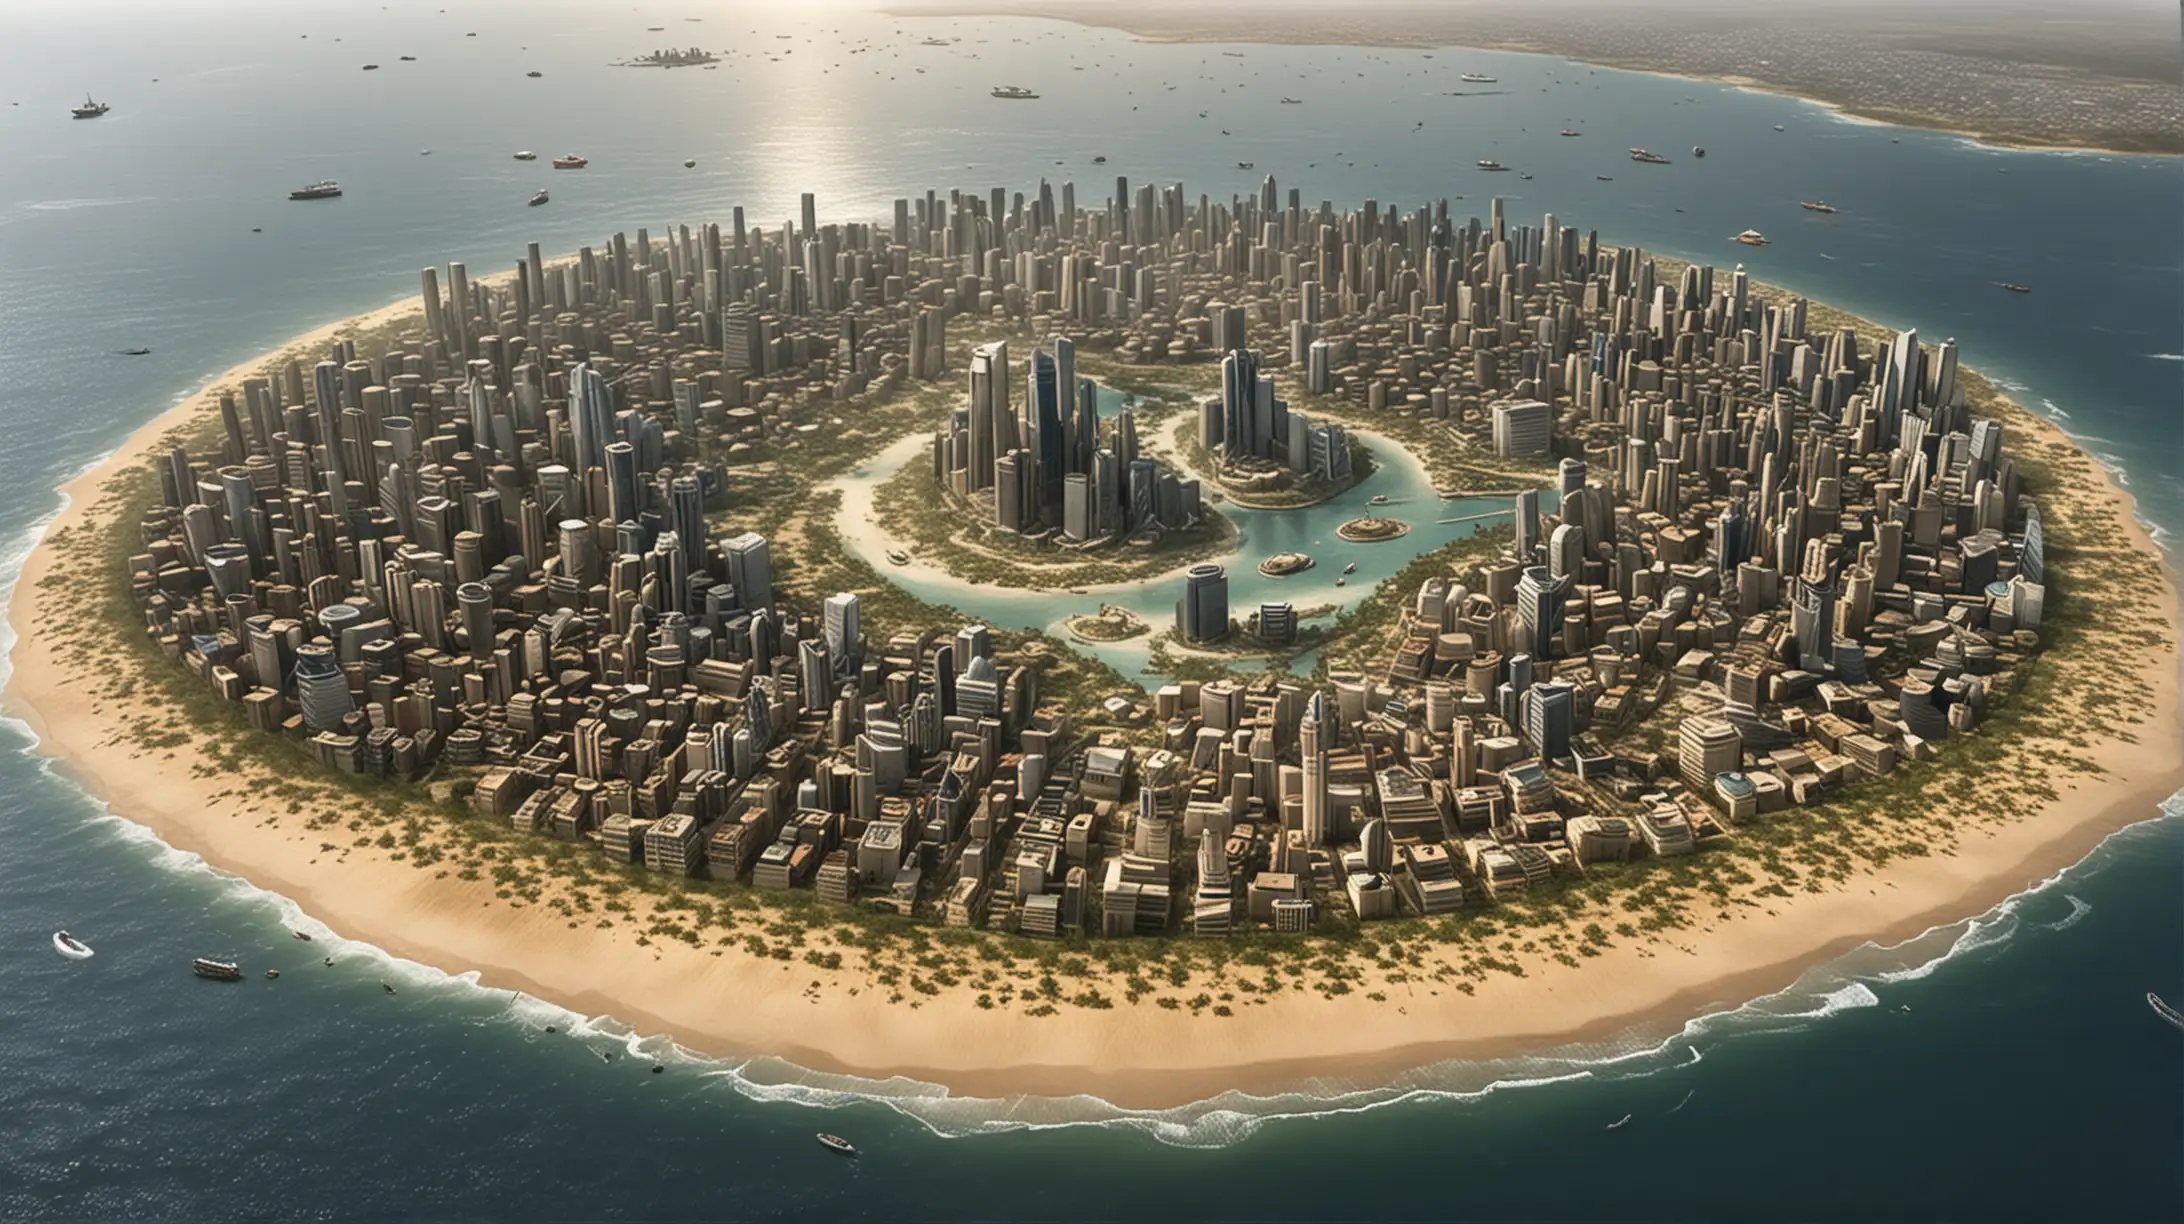 Urban Development Artificial Island Expansion with Mega City in Africa